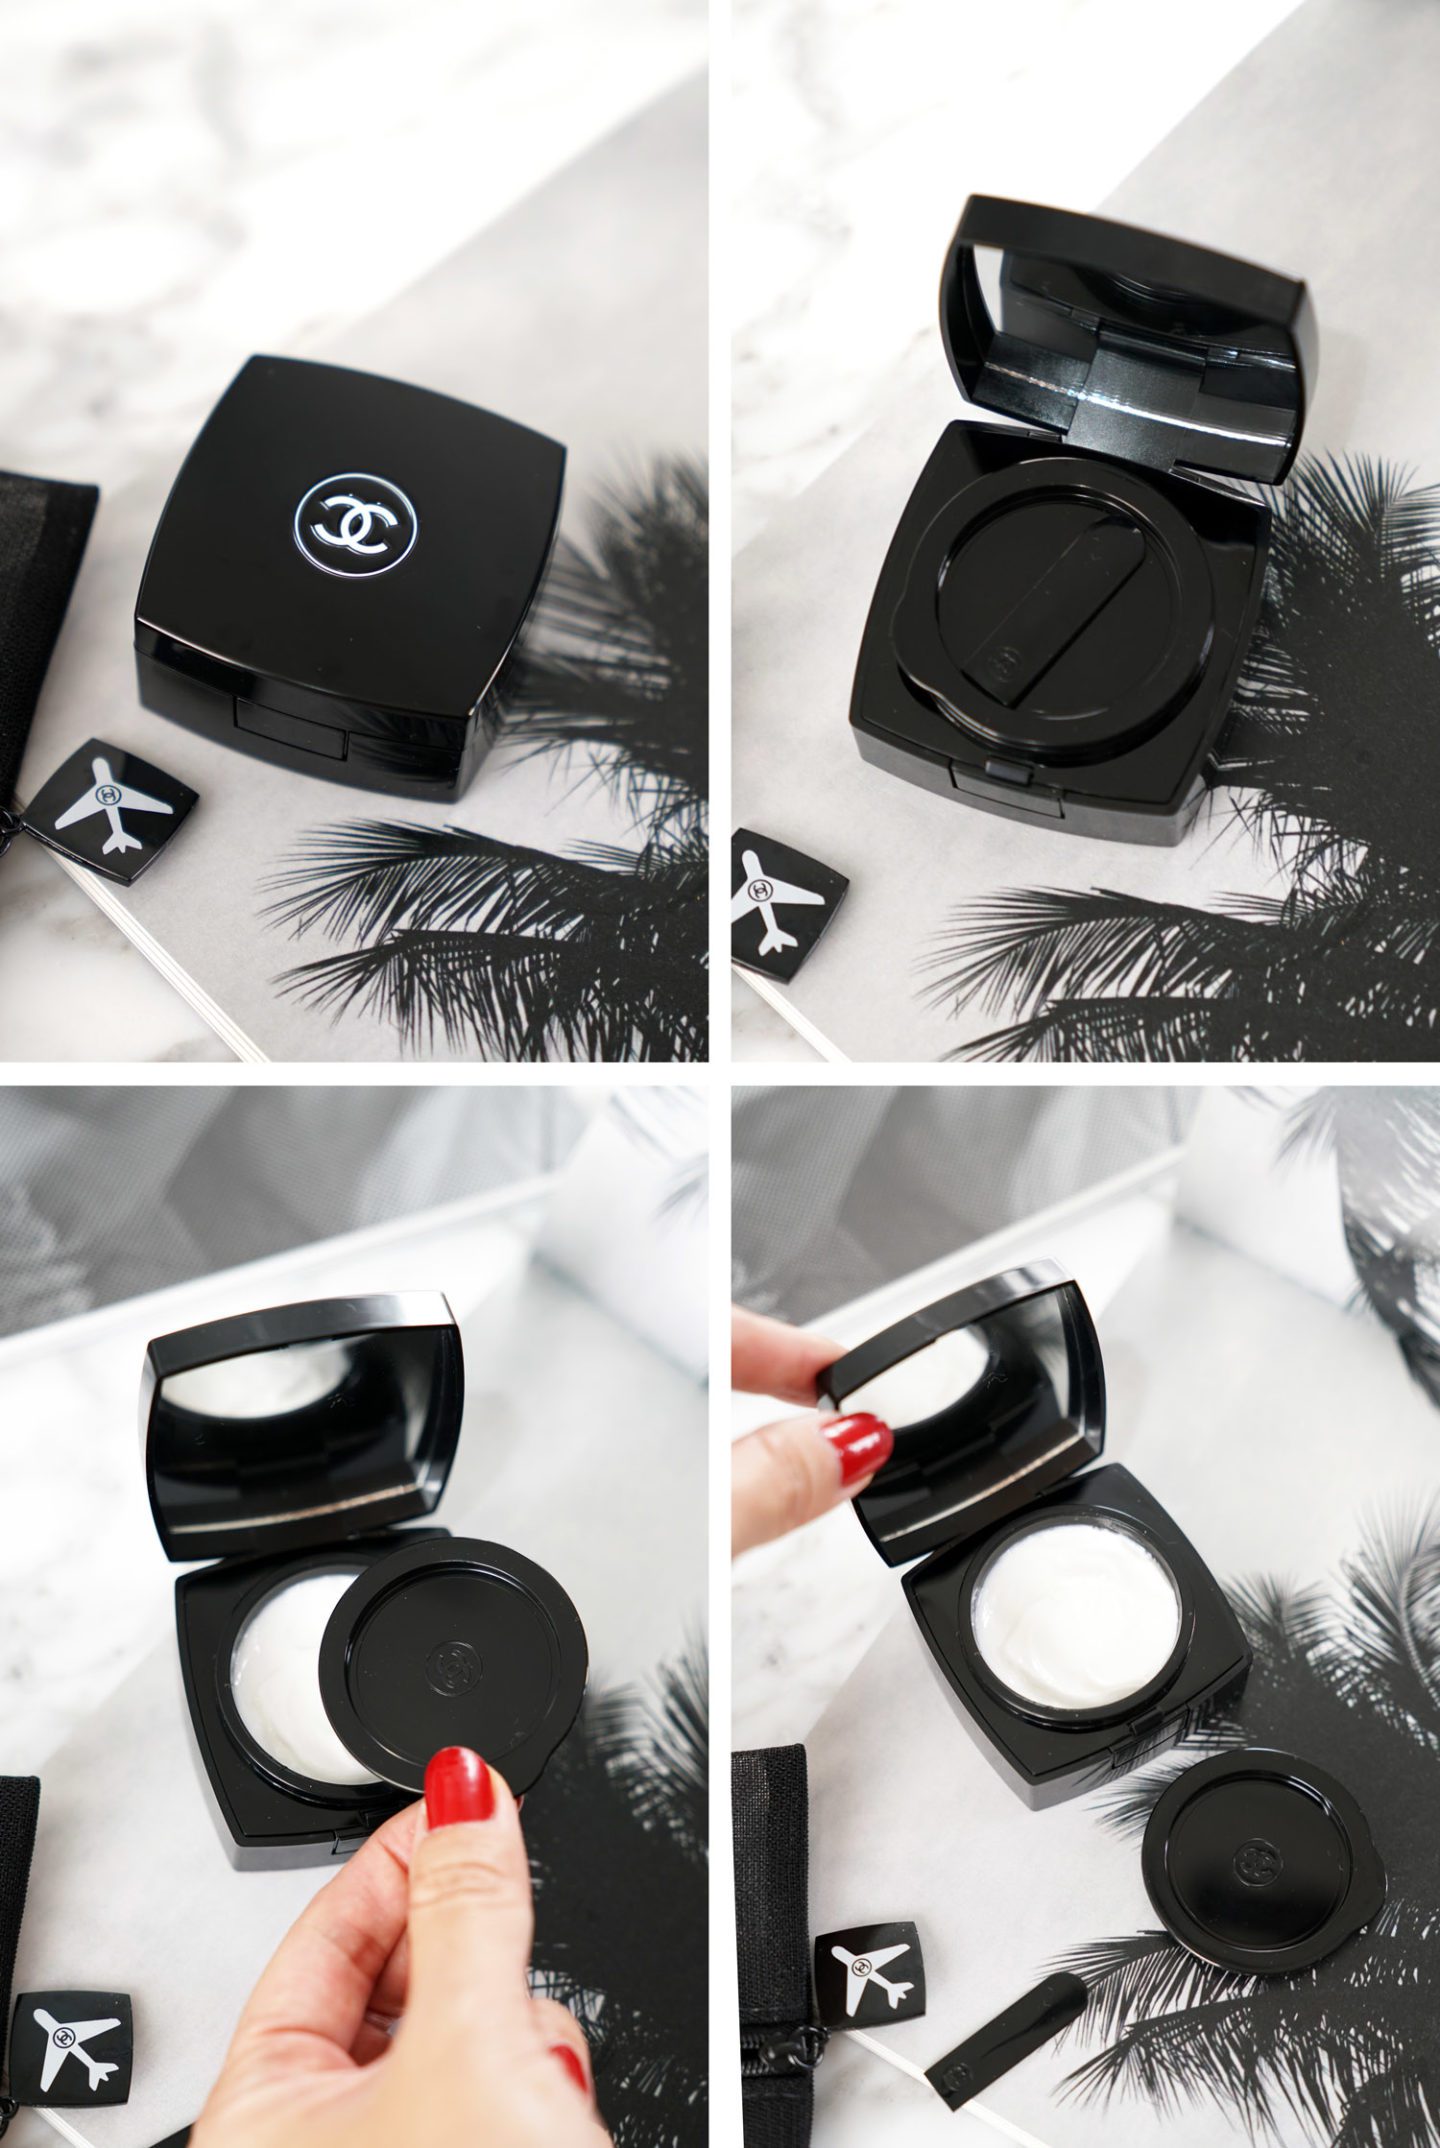 Chanel Mini Hydra Beauty Creme from the Le Voyage Travel Set 